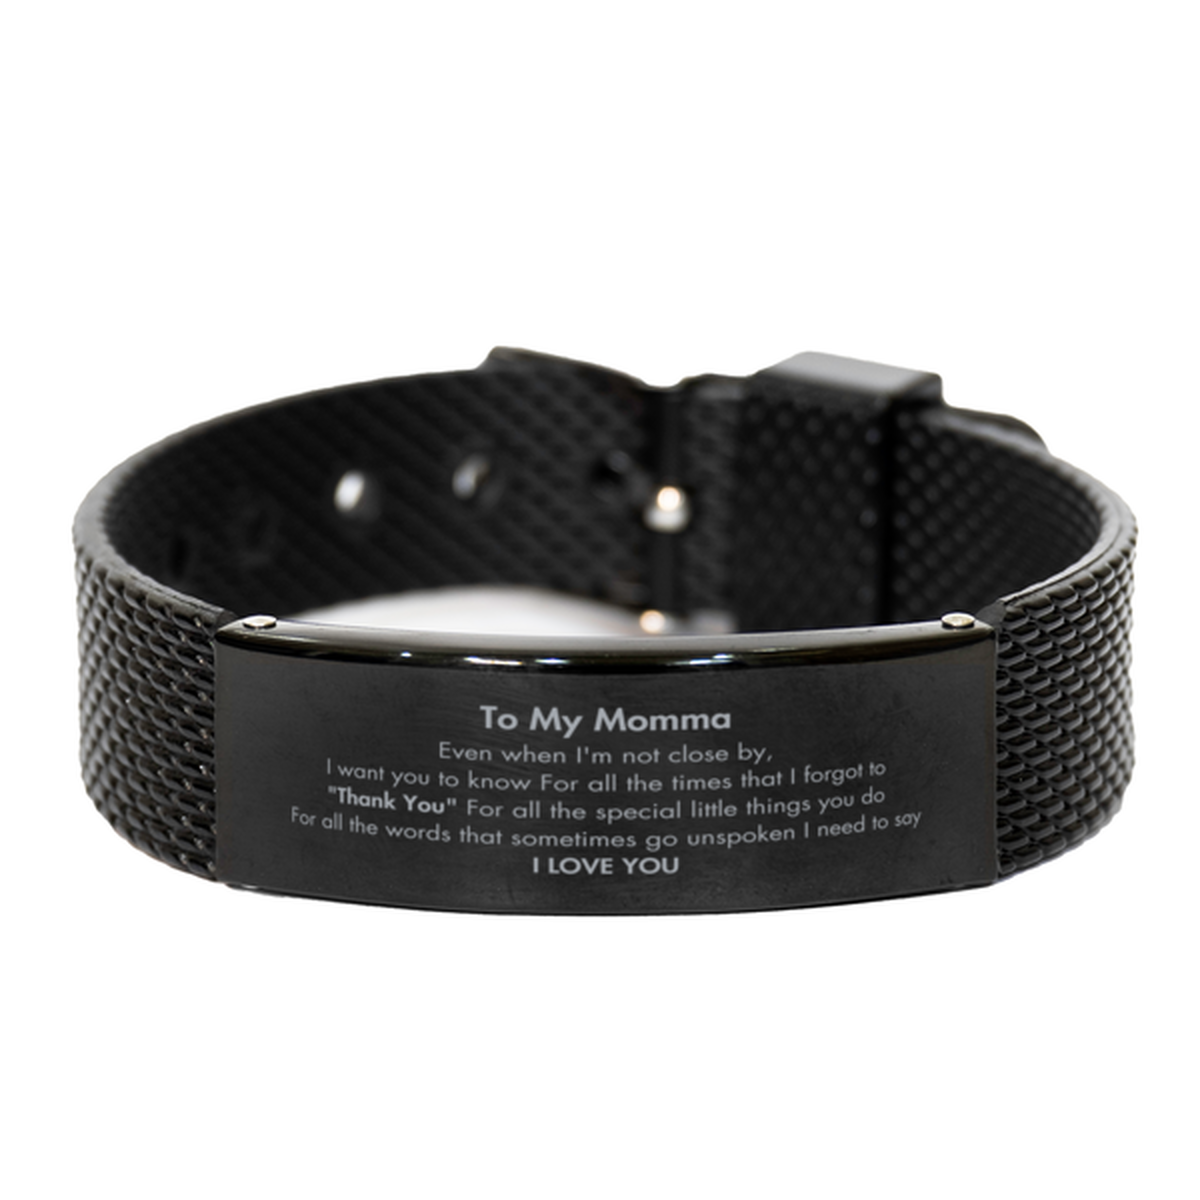 Thank You Gifts for Momma, Keepsake Black Shark Mesh Bracelet Gifts for Momma Birthday Mother's day Father's Day Momma For all the words That sometimes go unspoken I need to say I LOVE YOU